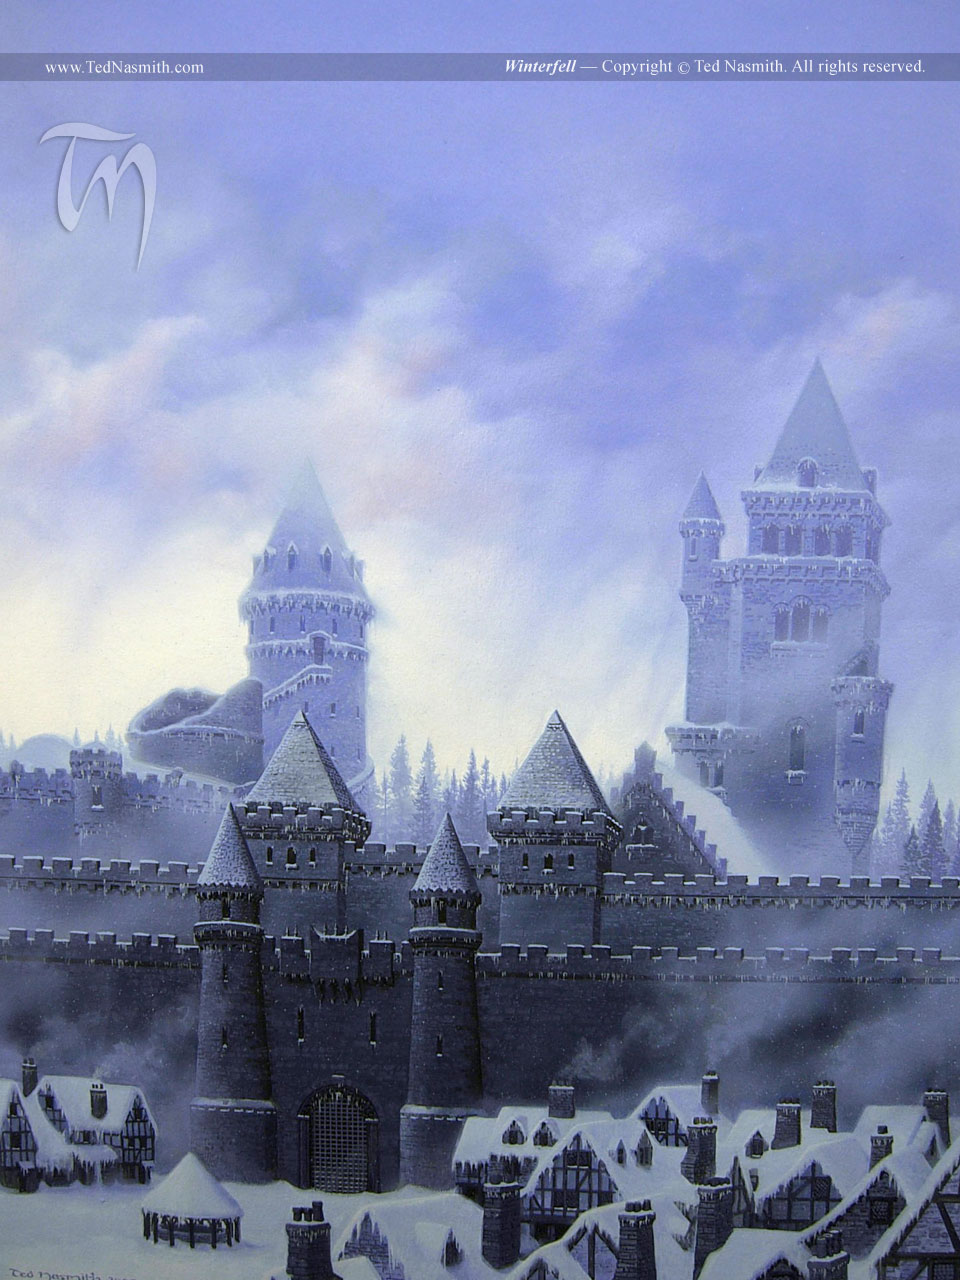 Winterfell - A Song of Ice and Fire - Ted Nasmith